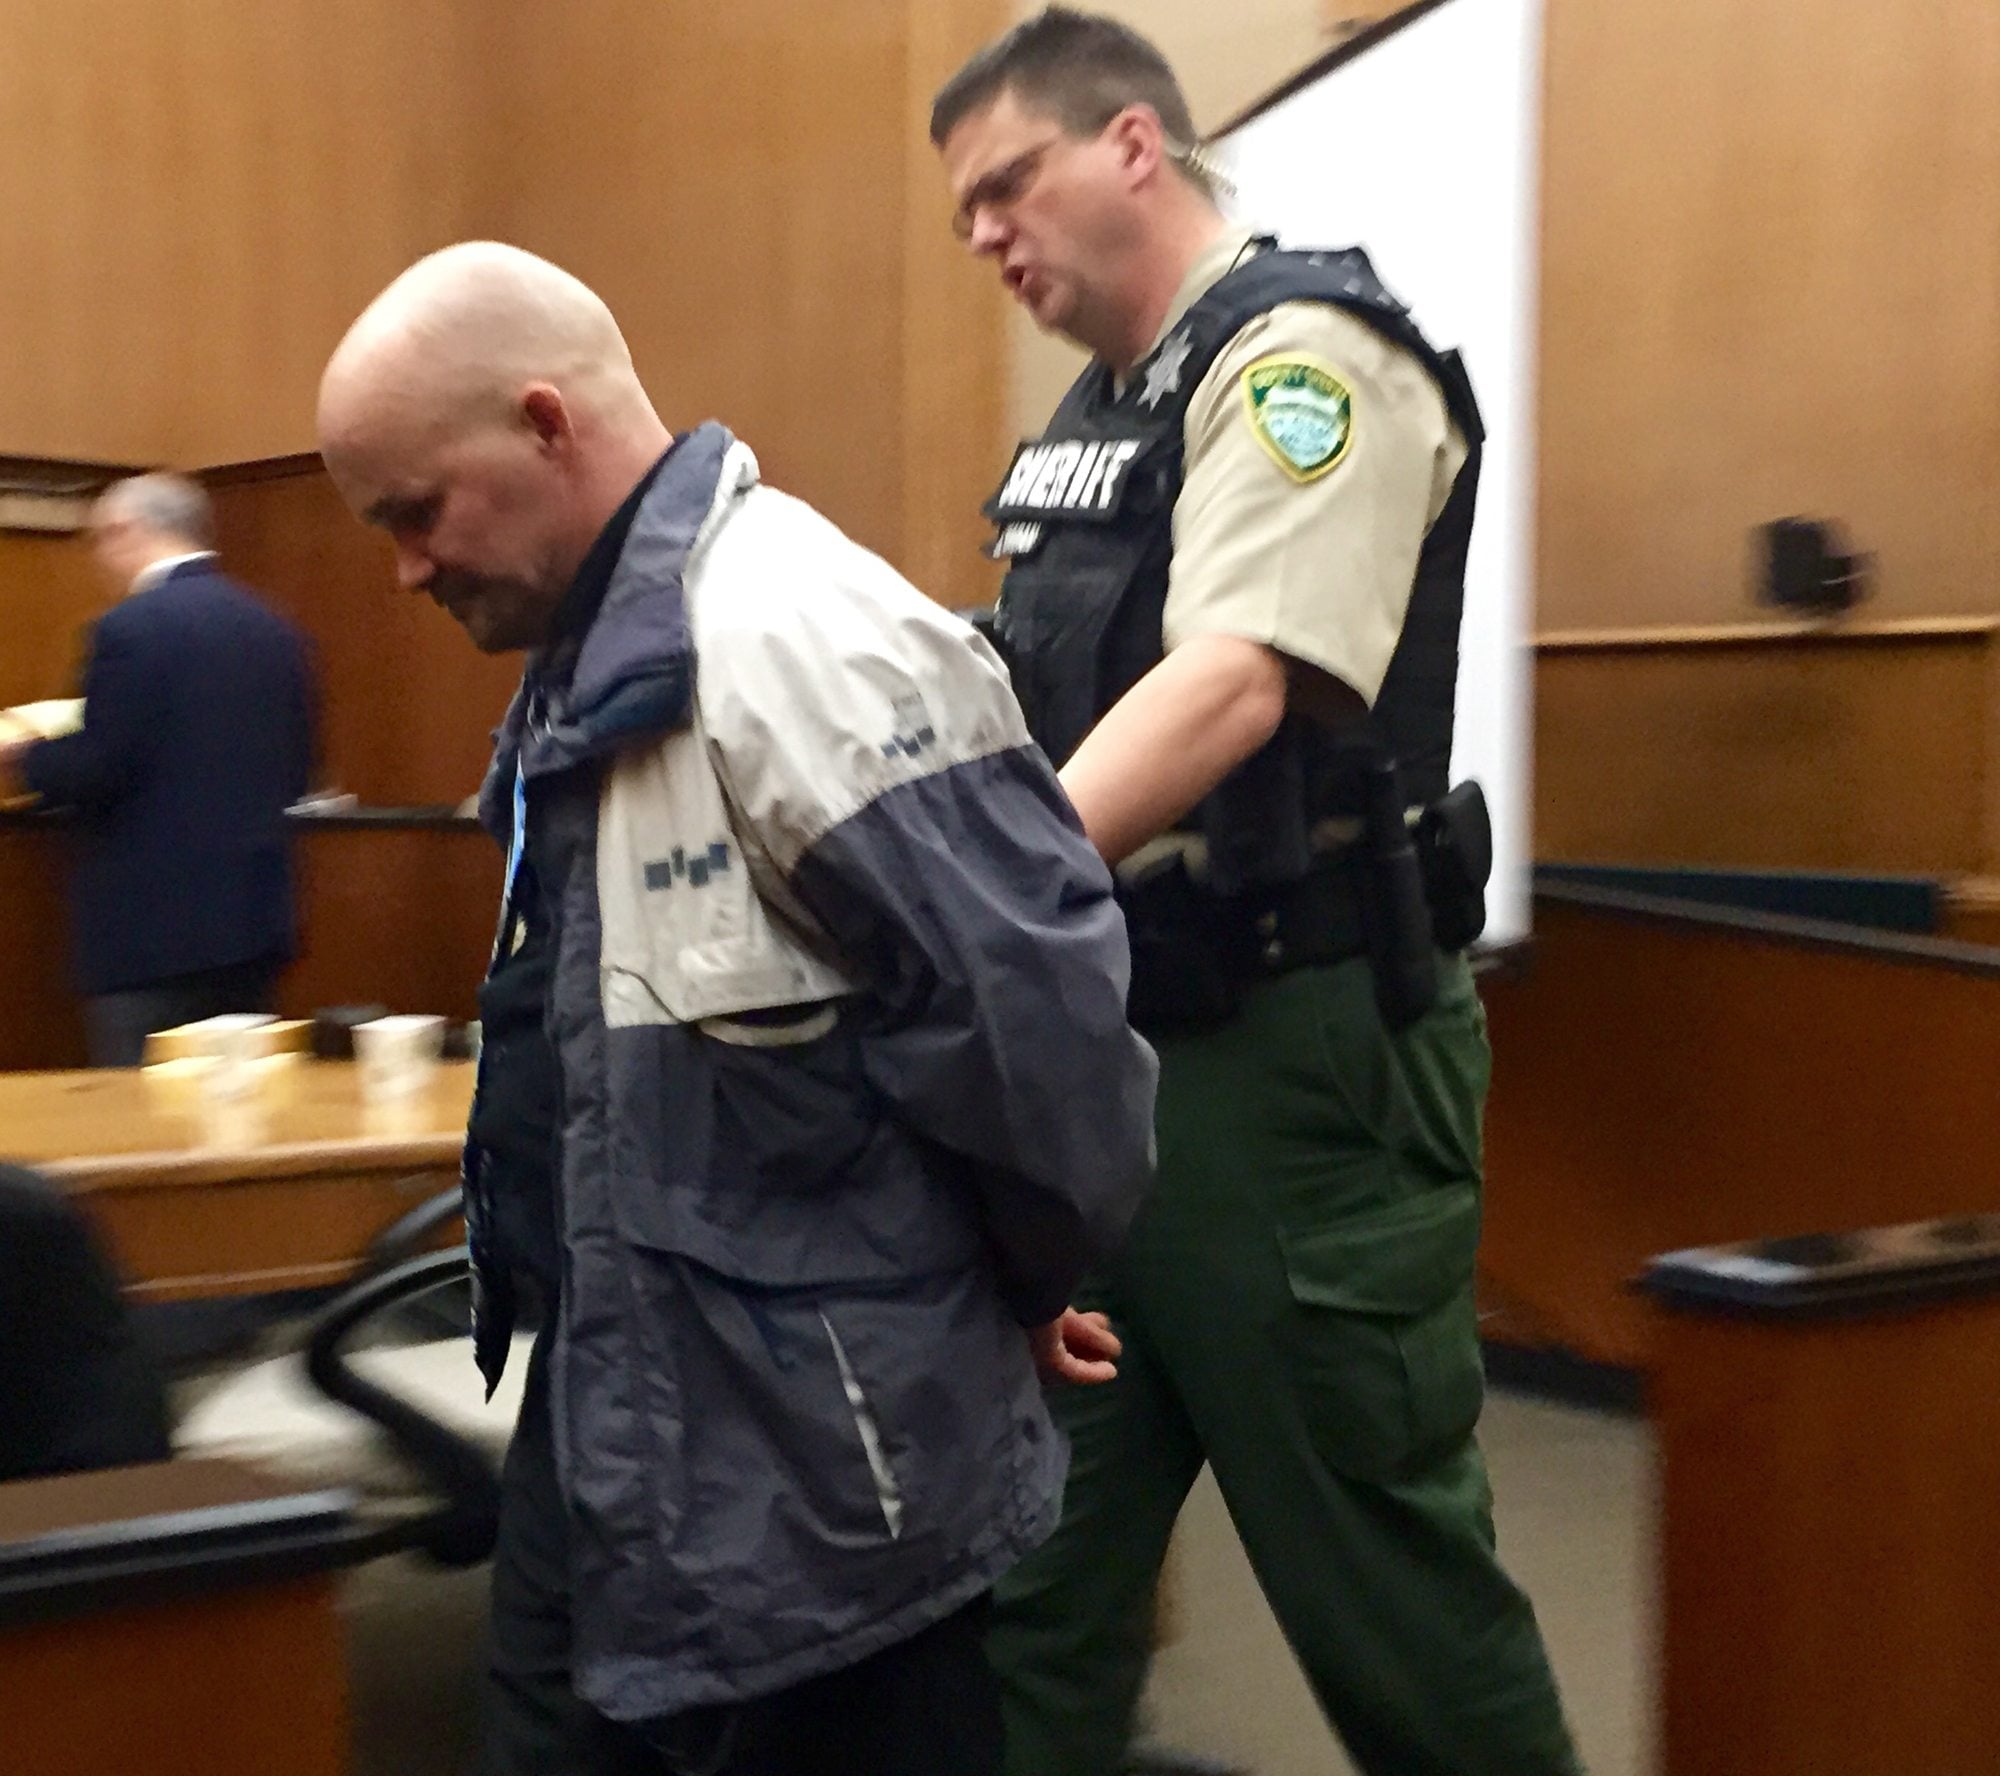 Ronald Ahlquist is taken into custody Thursday evening after a Clark County Superior Court jury found him guilty of manslaughter, identity theft and theft charges following a two-week trial.